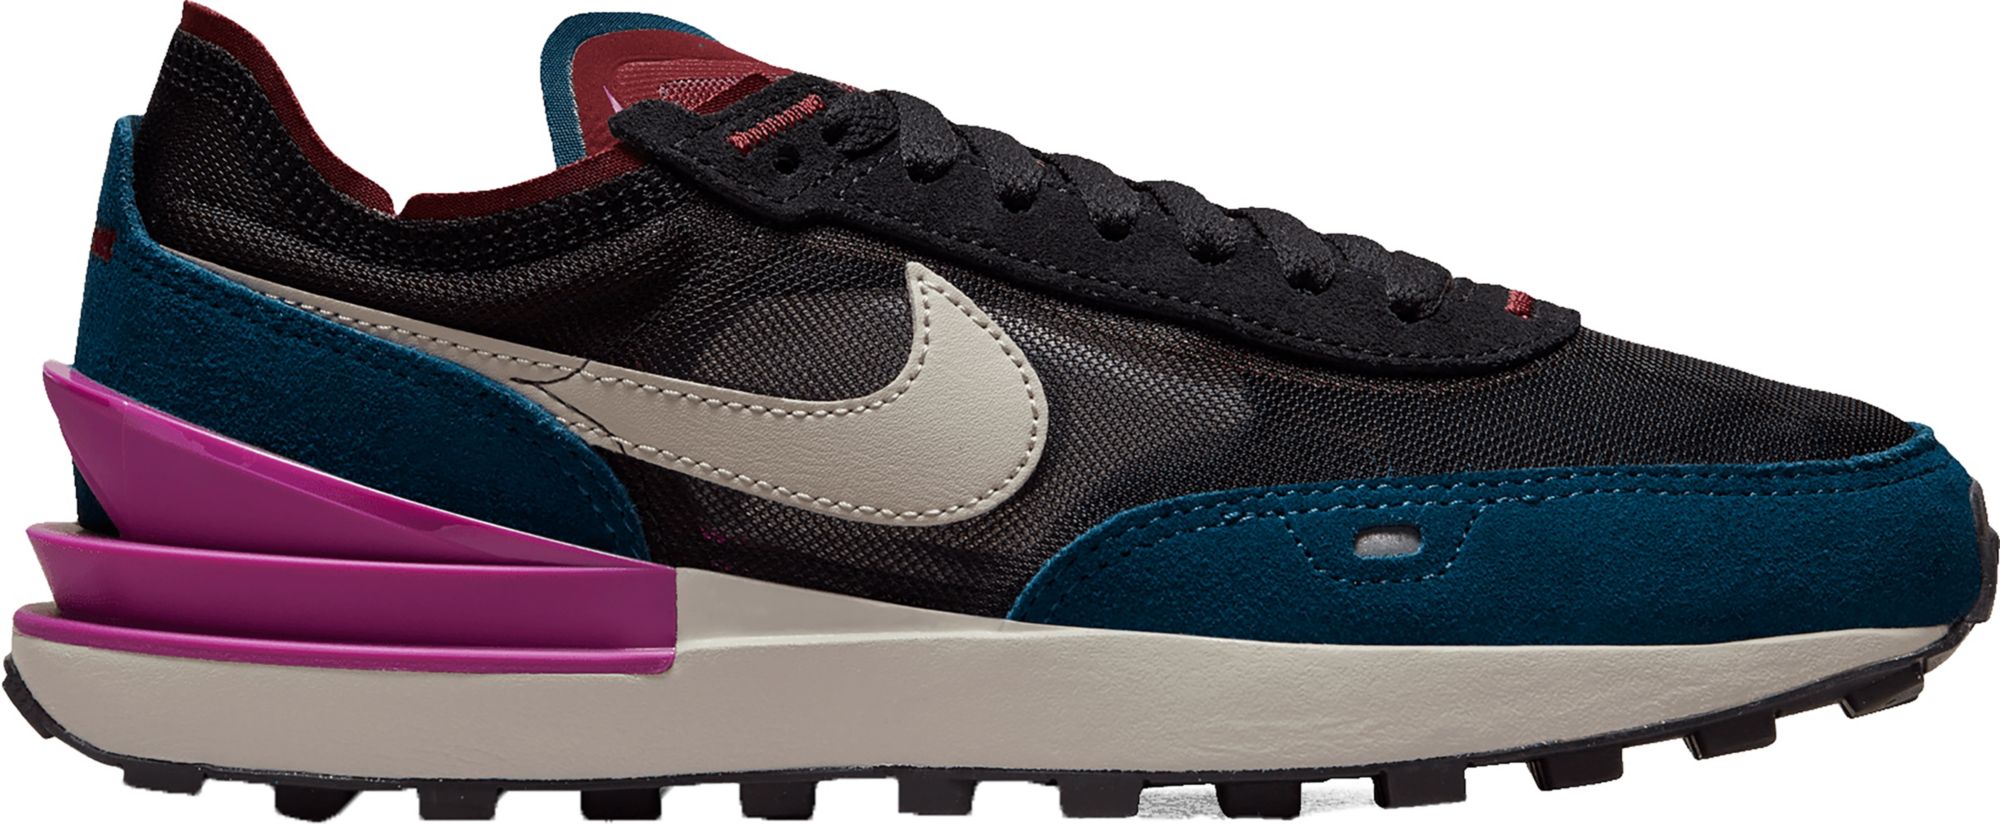 Nike Women's Waffle One Shoes (Select Colors) $45 + Free Store Pickup at Dick's Sporting Goods or F/S on $49+